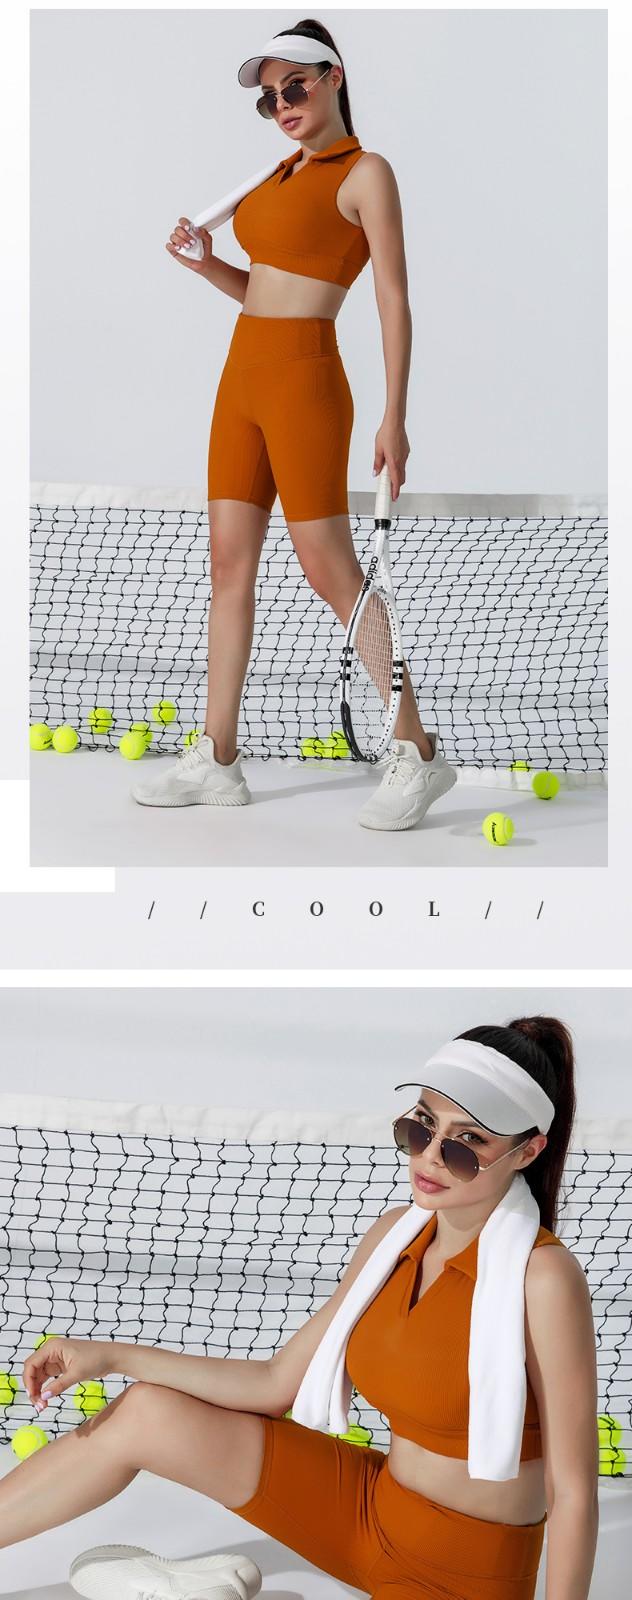 INGOR tennis outfit woman supplier for girls